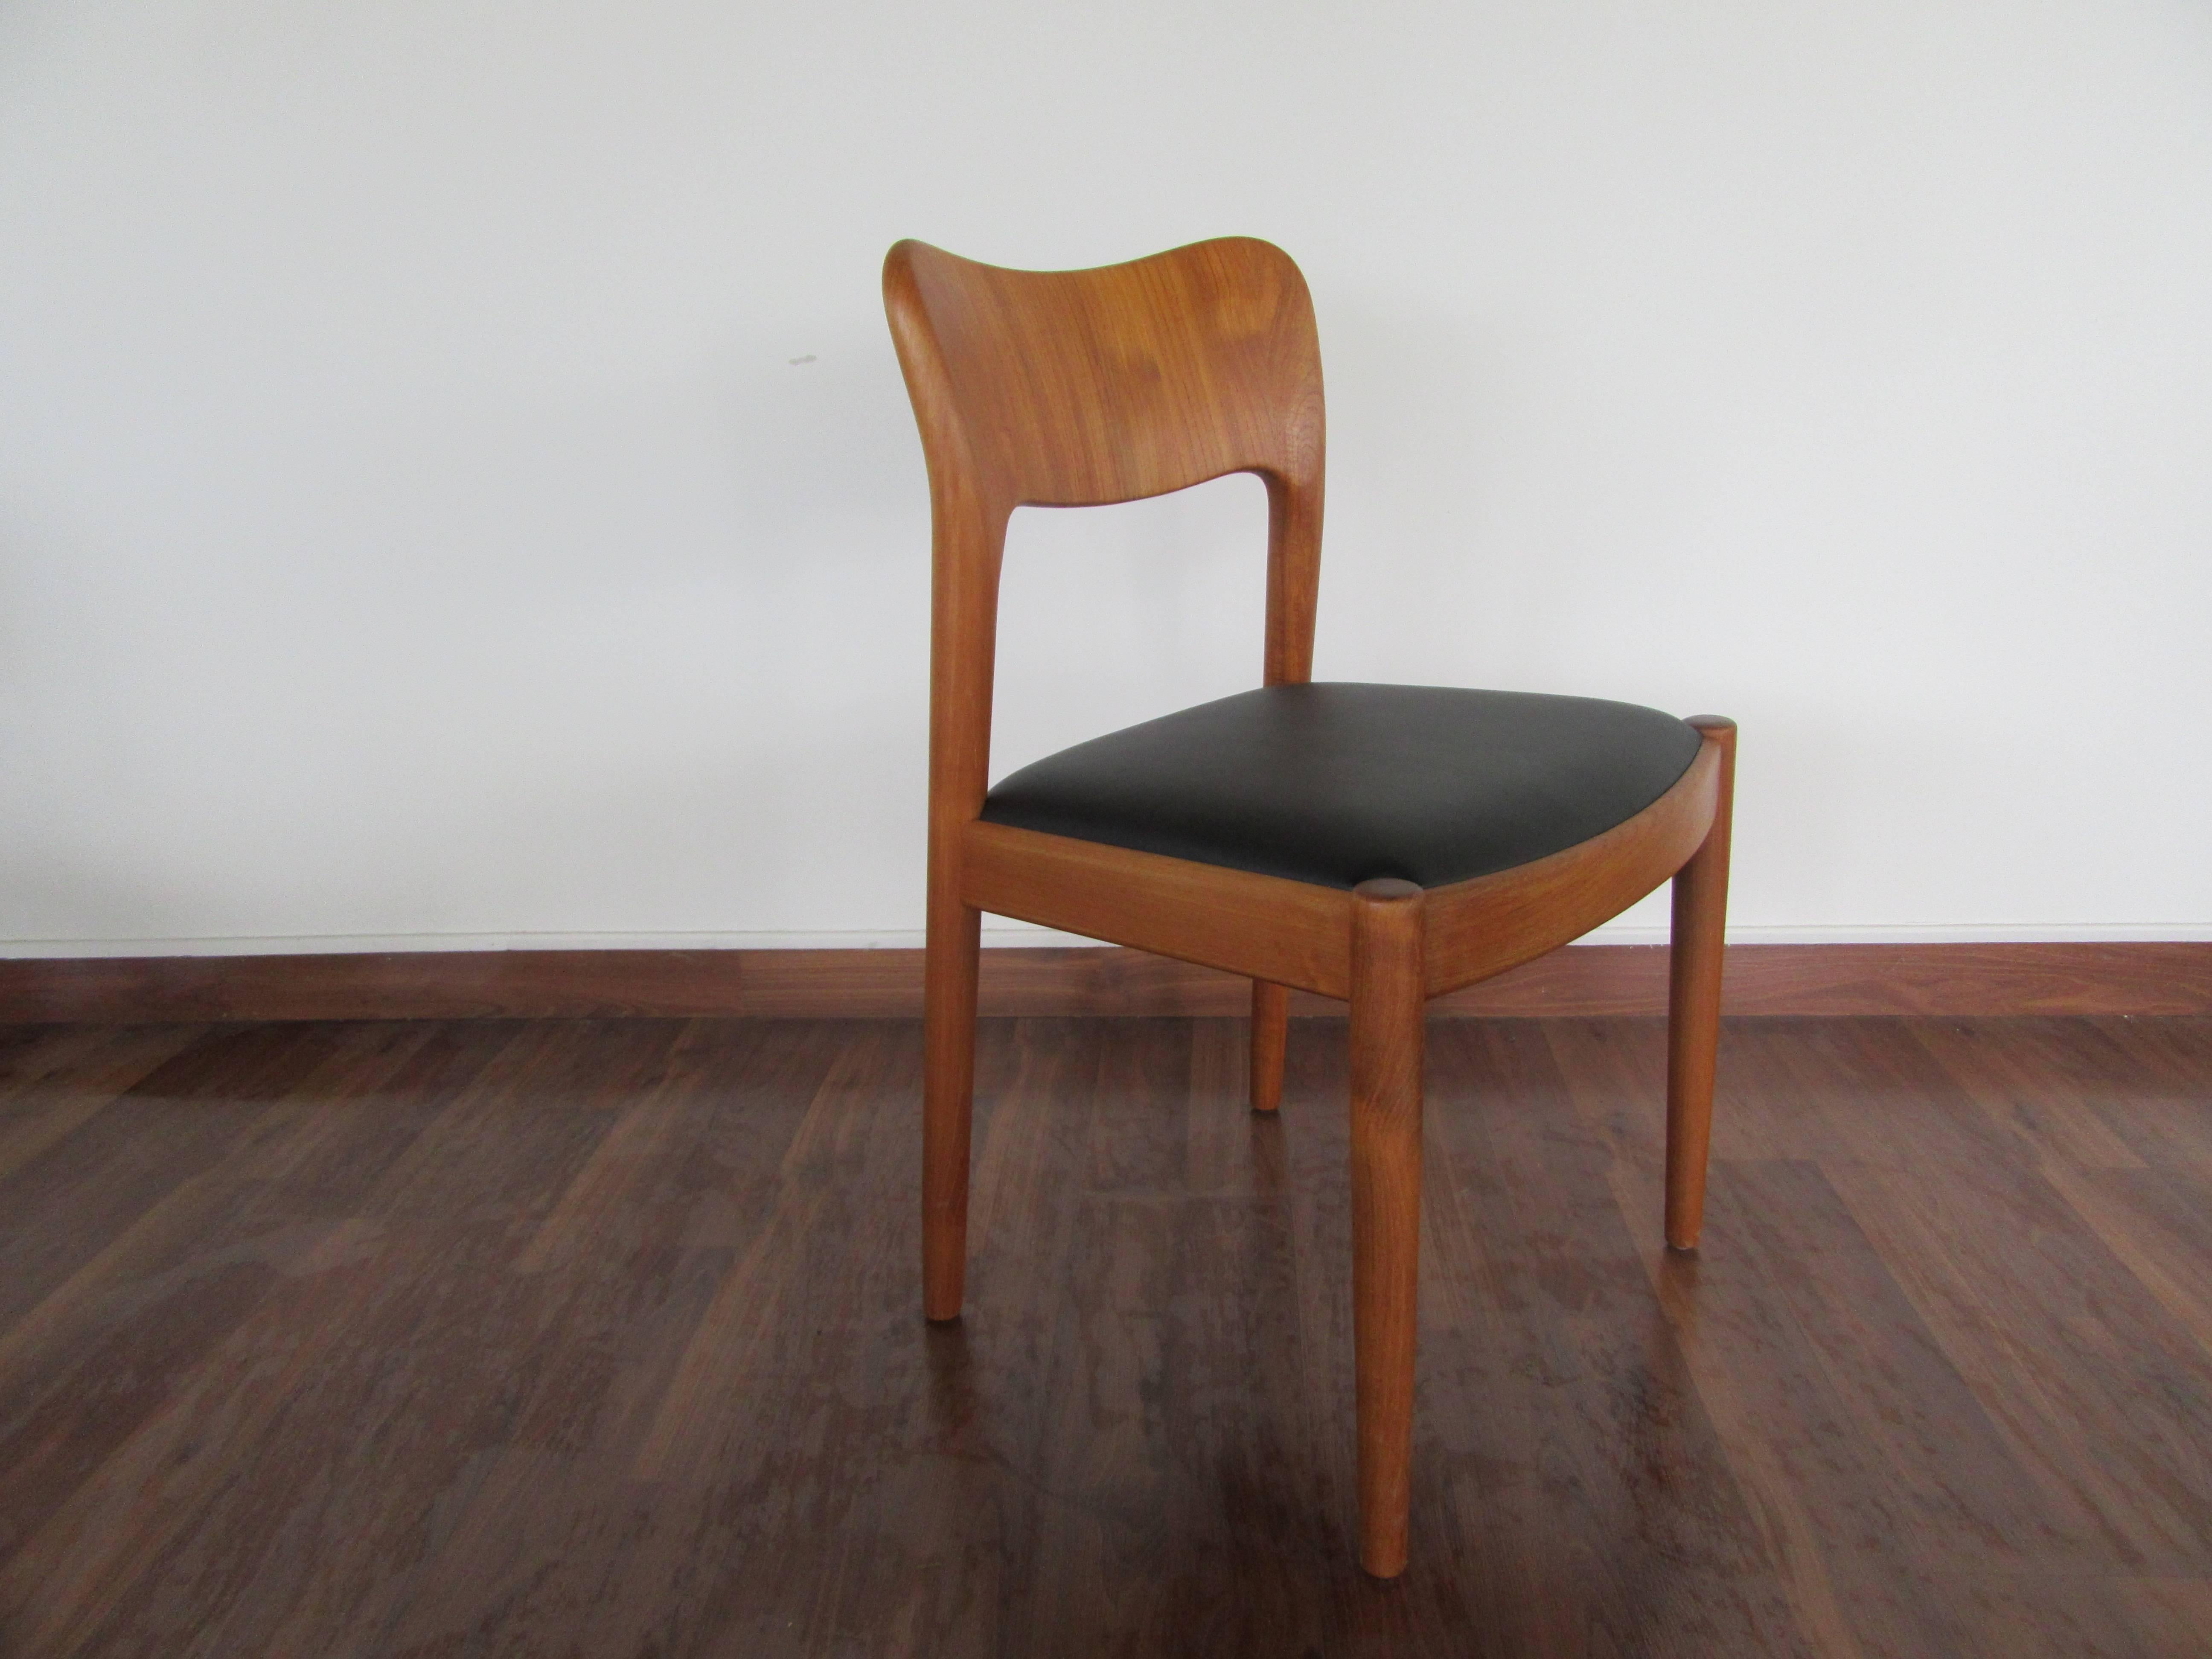 Danish Set of Three Teak Dining Chairs by Koefoed Hornslet with Leather Seats